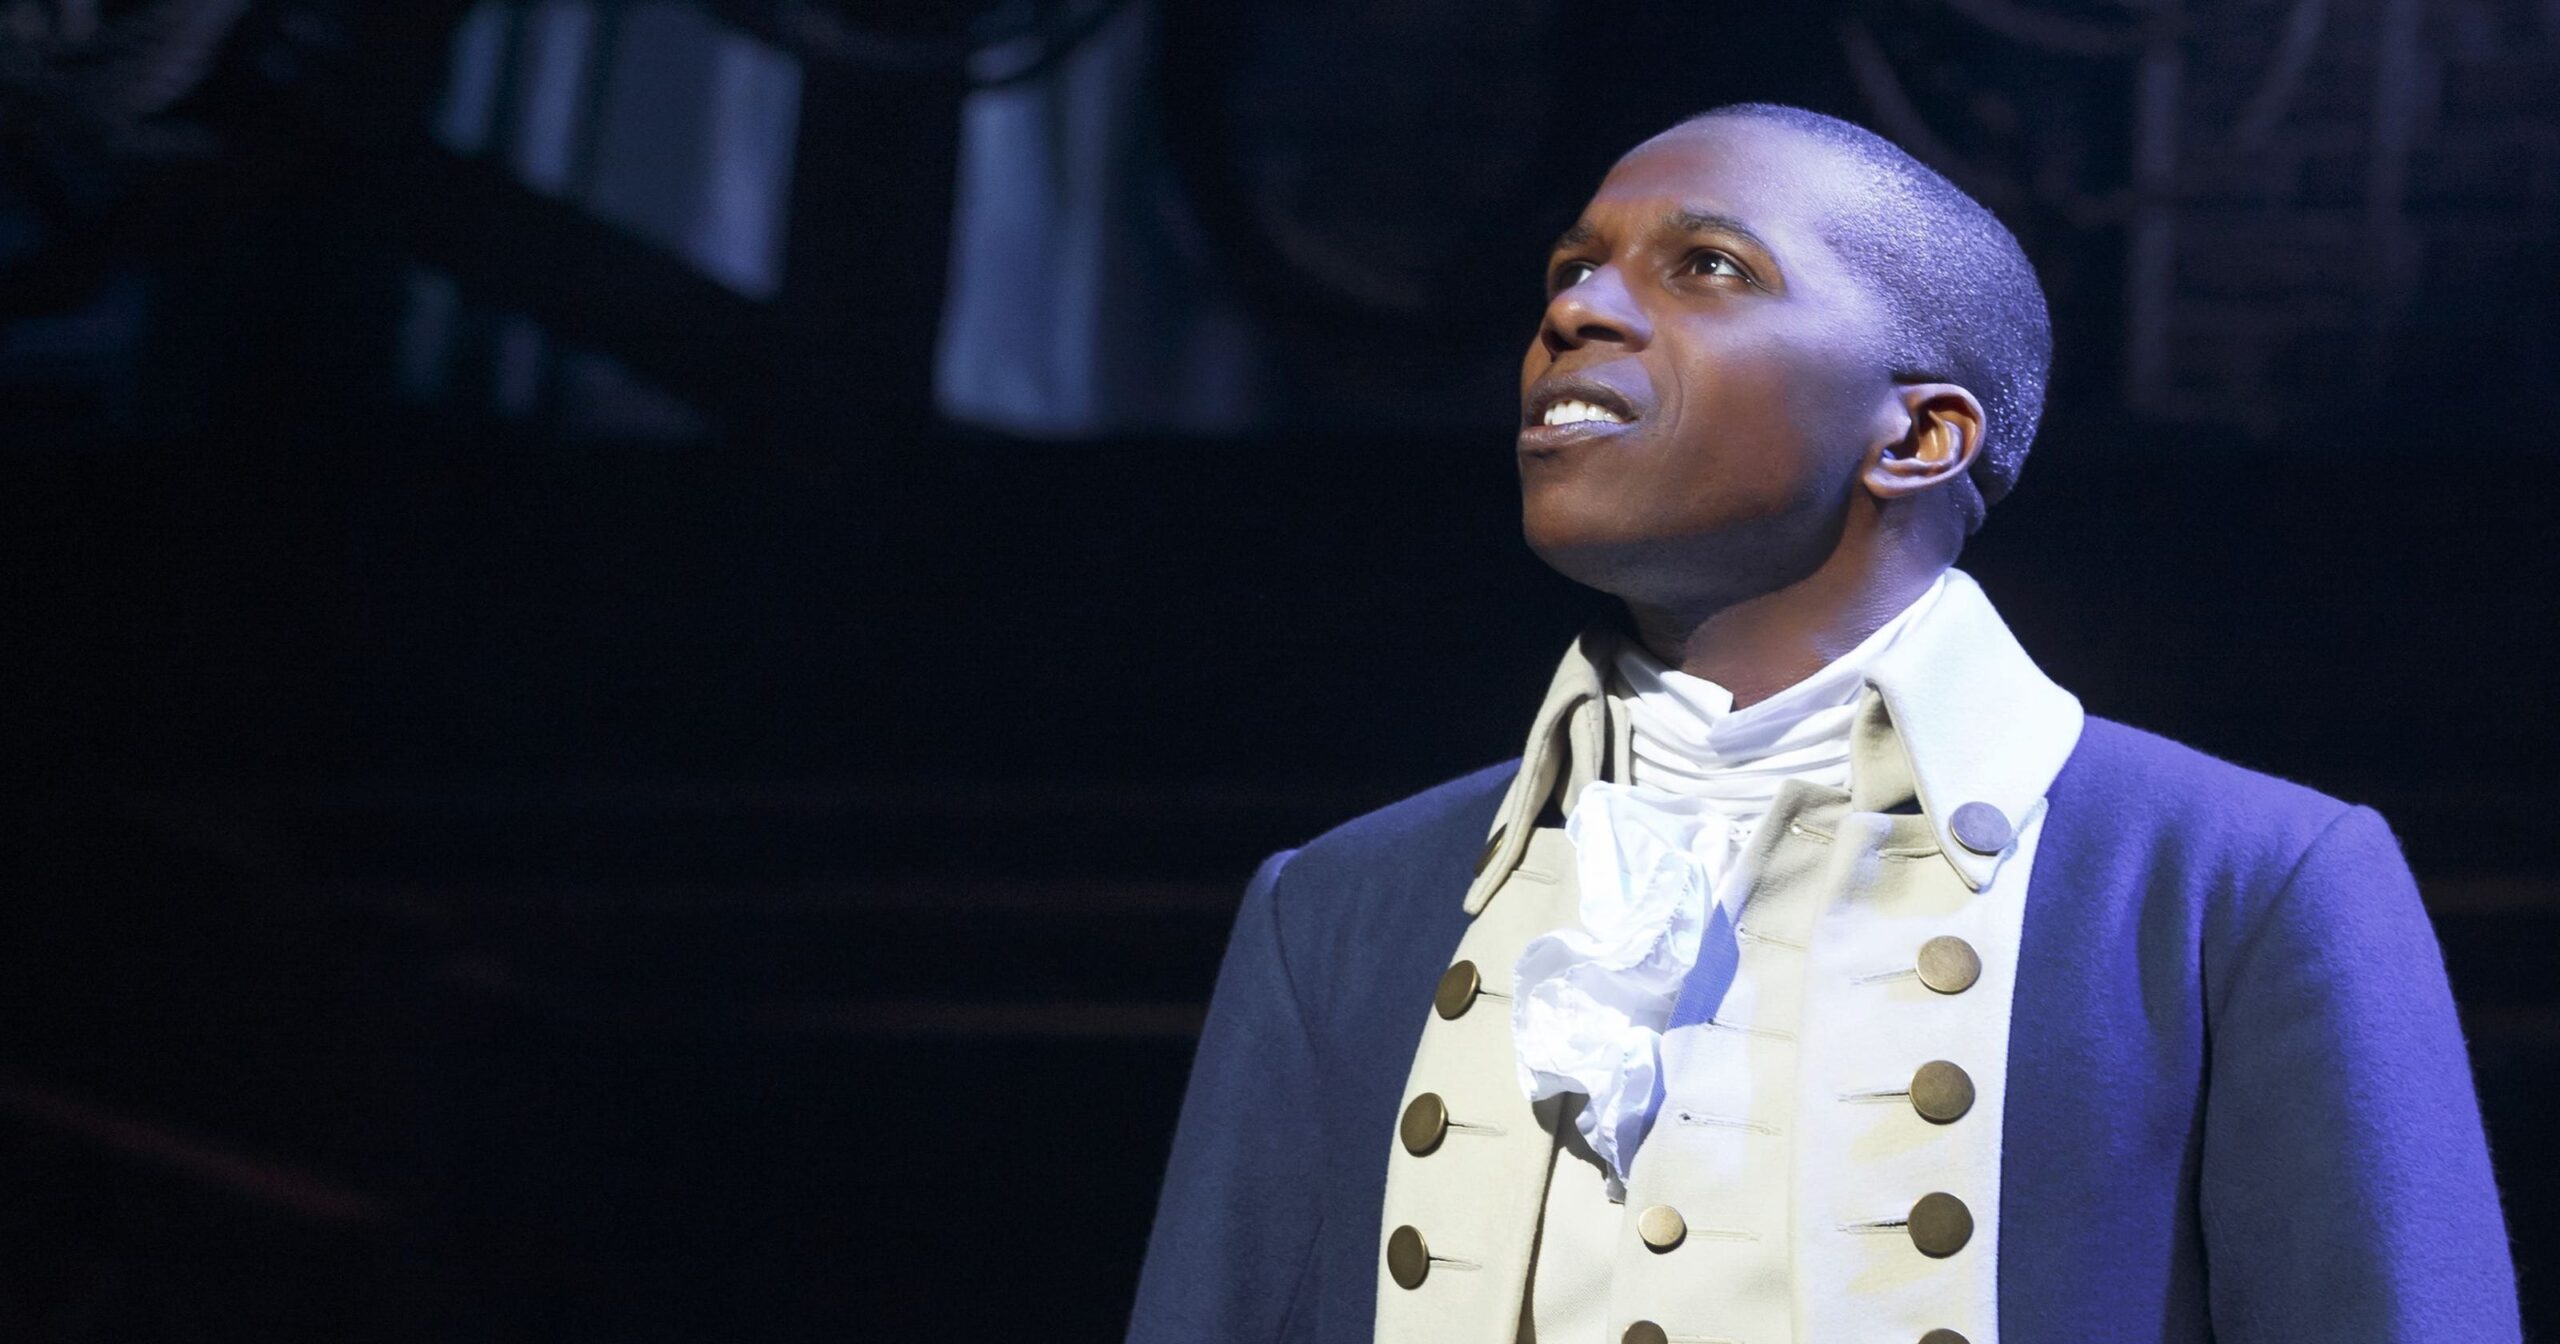 Leslie Odom Jr.: Reason No.101 On Why You Should Never Place Anyone in a Box